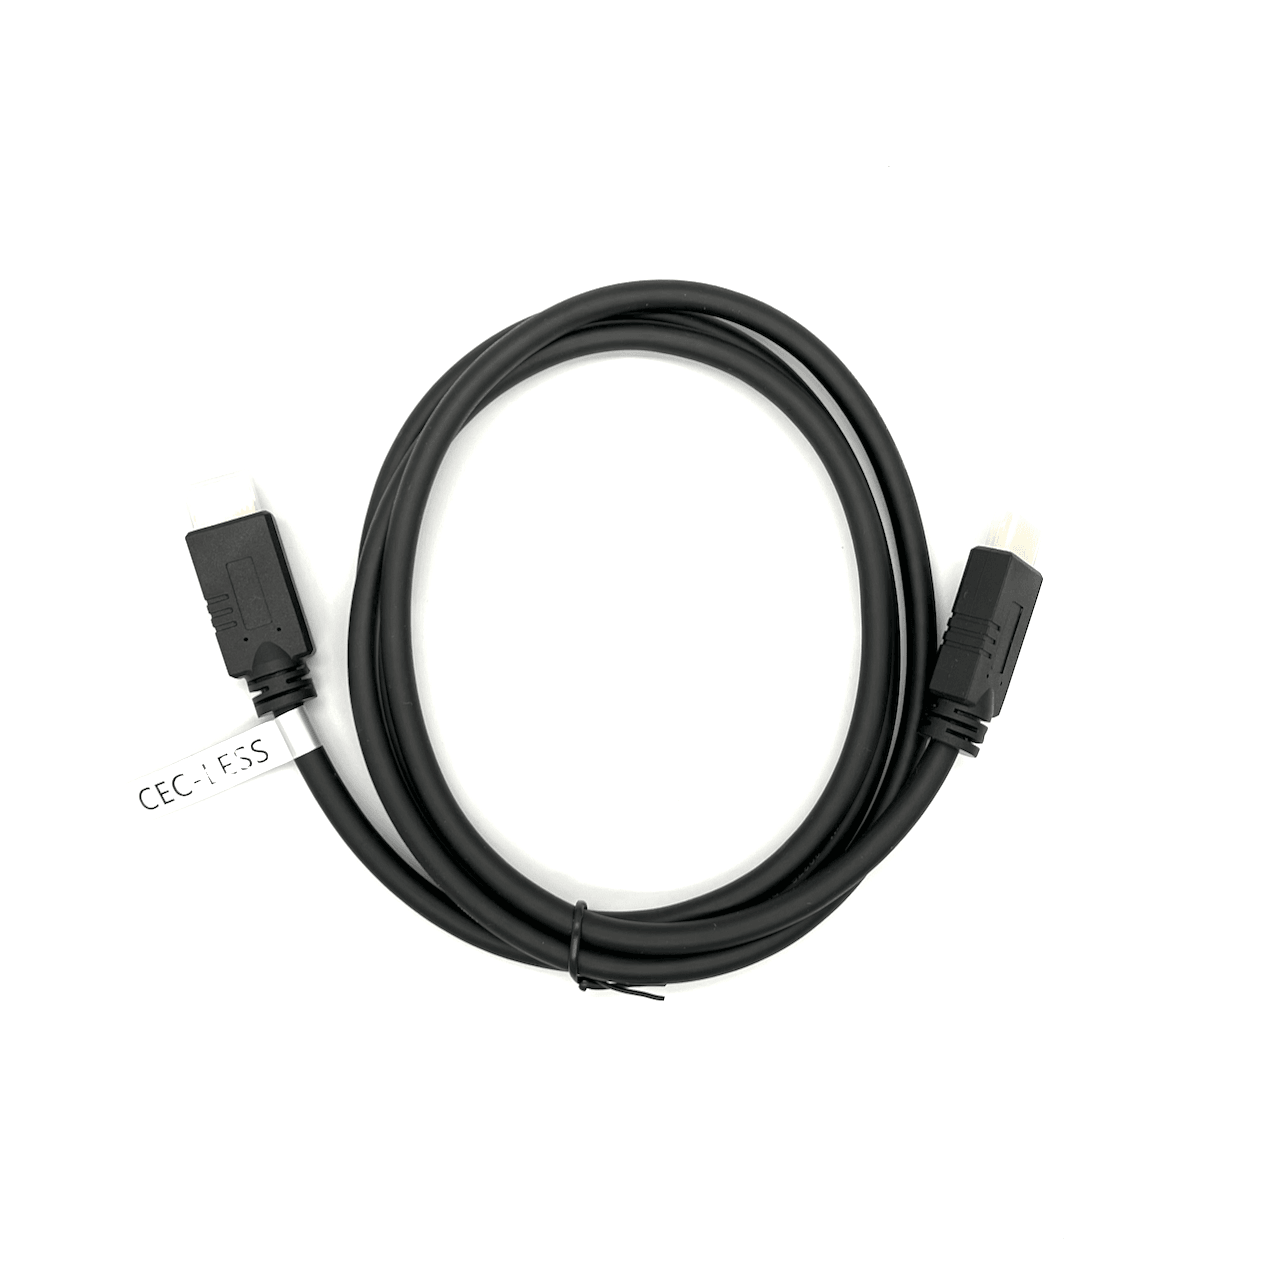 infrastructuur Republikeinse partij ketting Video Cables - HDMI without CEC | MiSTer Addons